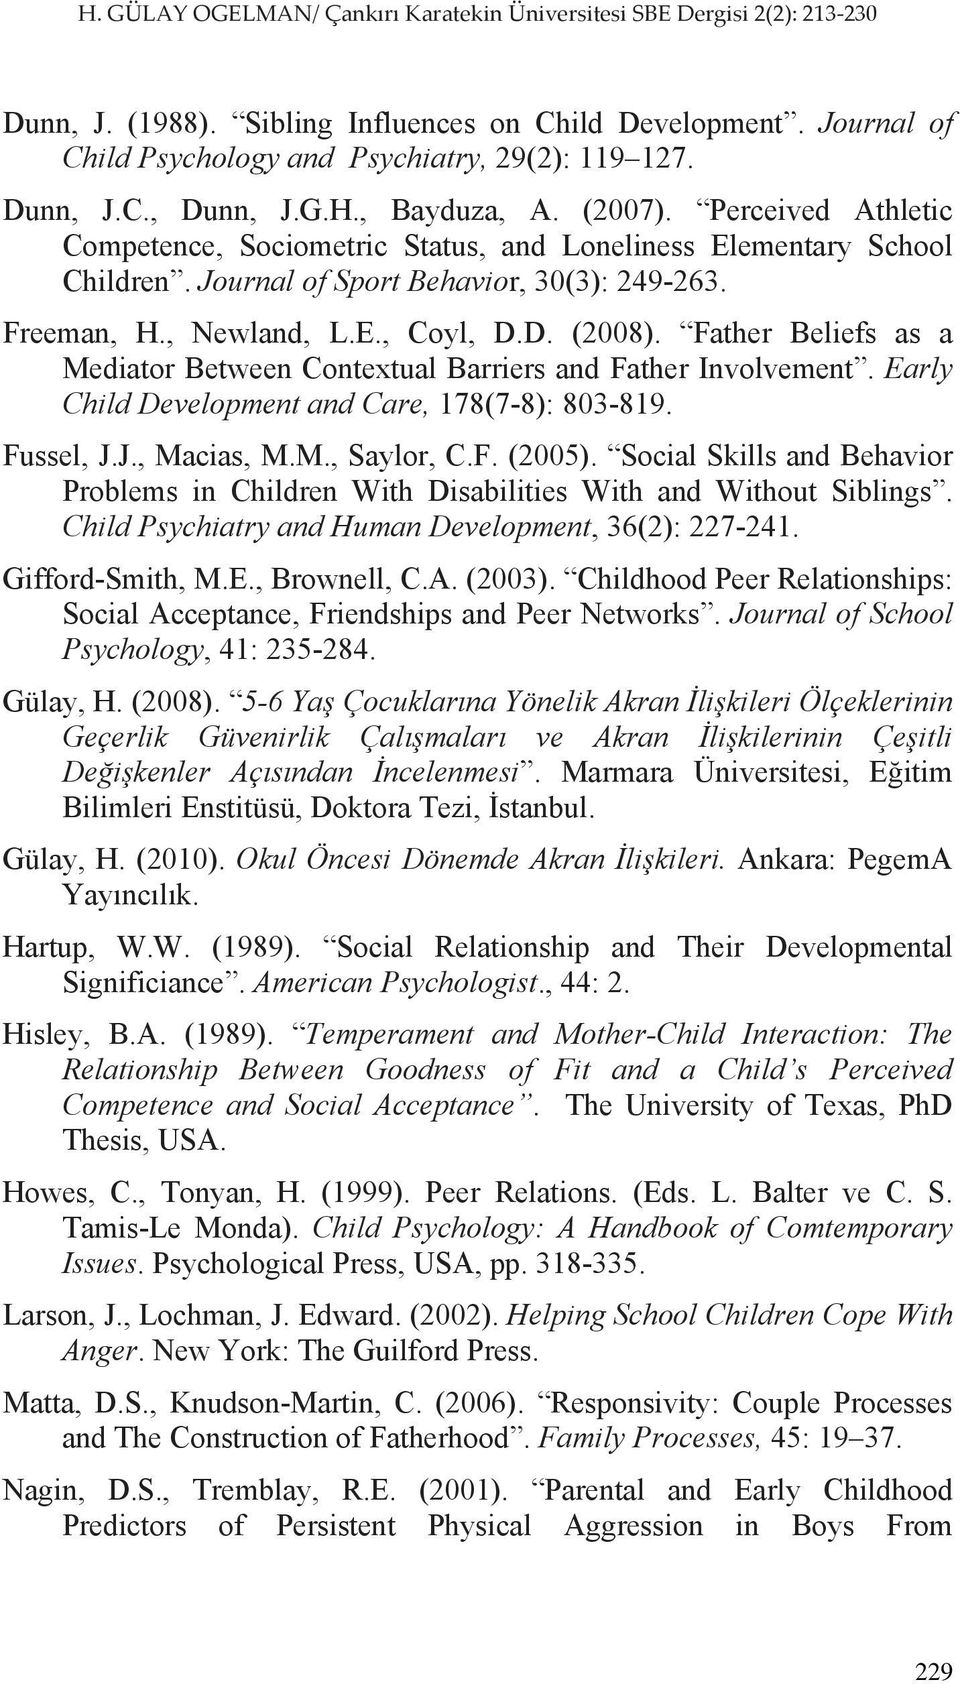 Father Beliefs as a Mediator Between Contextual Barriers and Father Involvement. Early Child Development and Care, 178(7-8): 803-819. Fussel, J.J., Macias, M.M., Saylor, C.F. (2005).